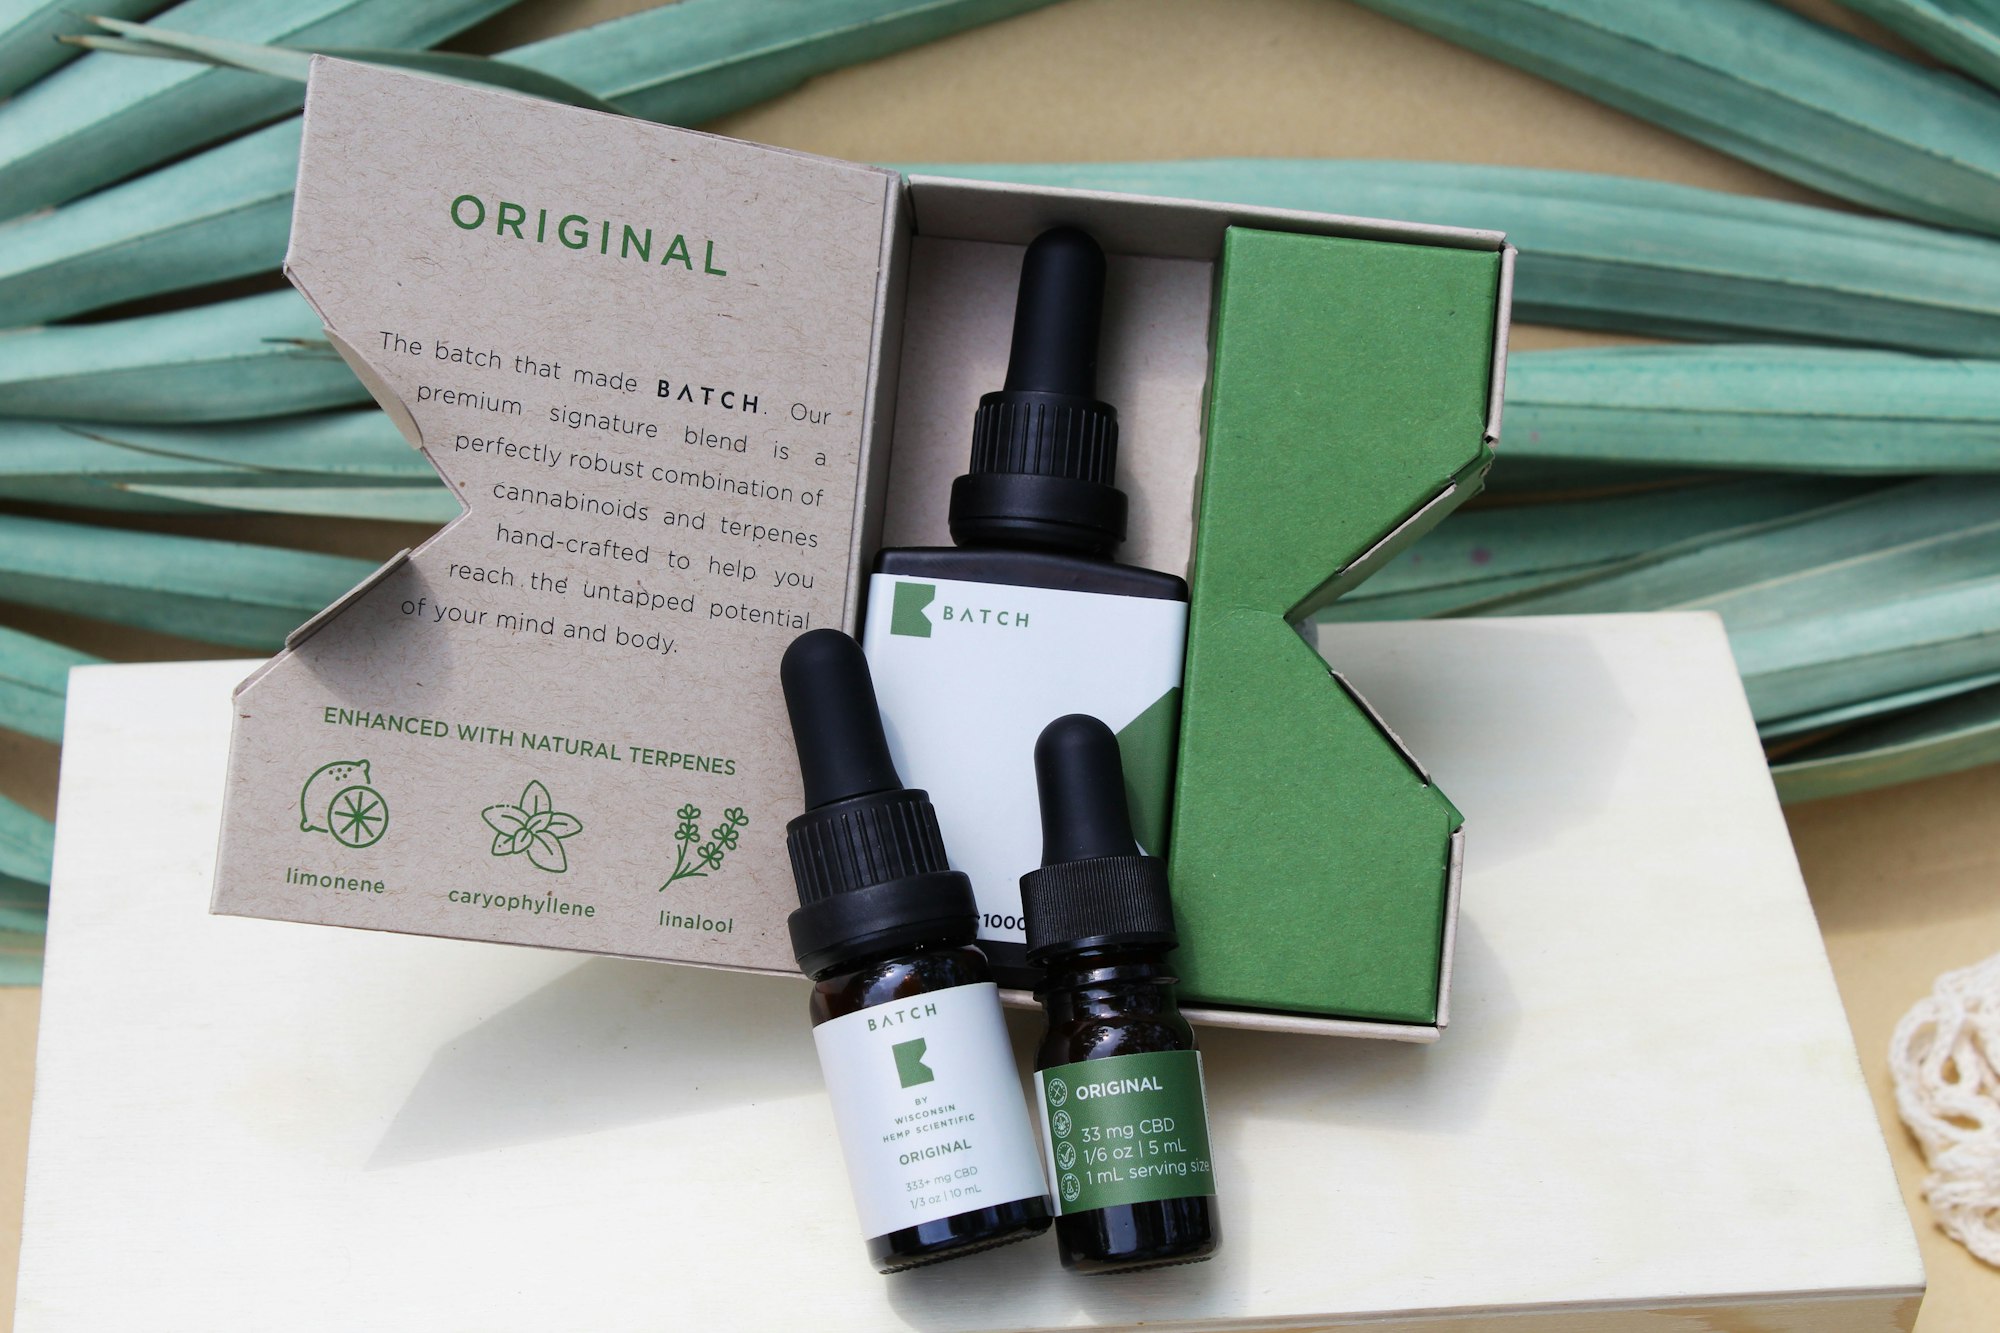 Original CBD oil tinctures displayed on wooden box with palm branches and aesthetically pleasing background